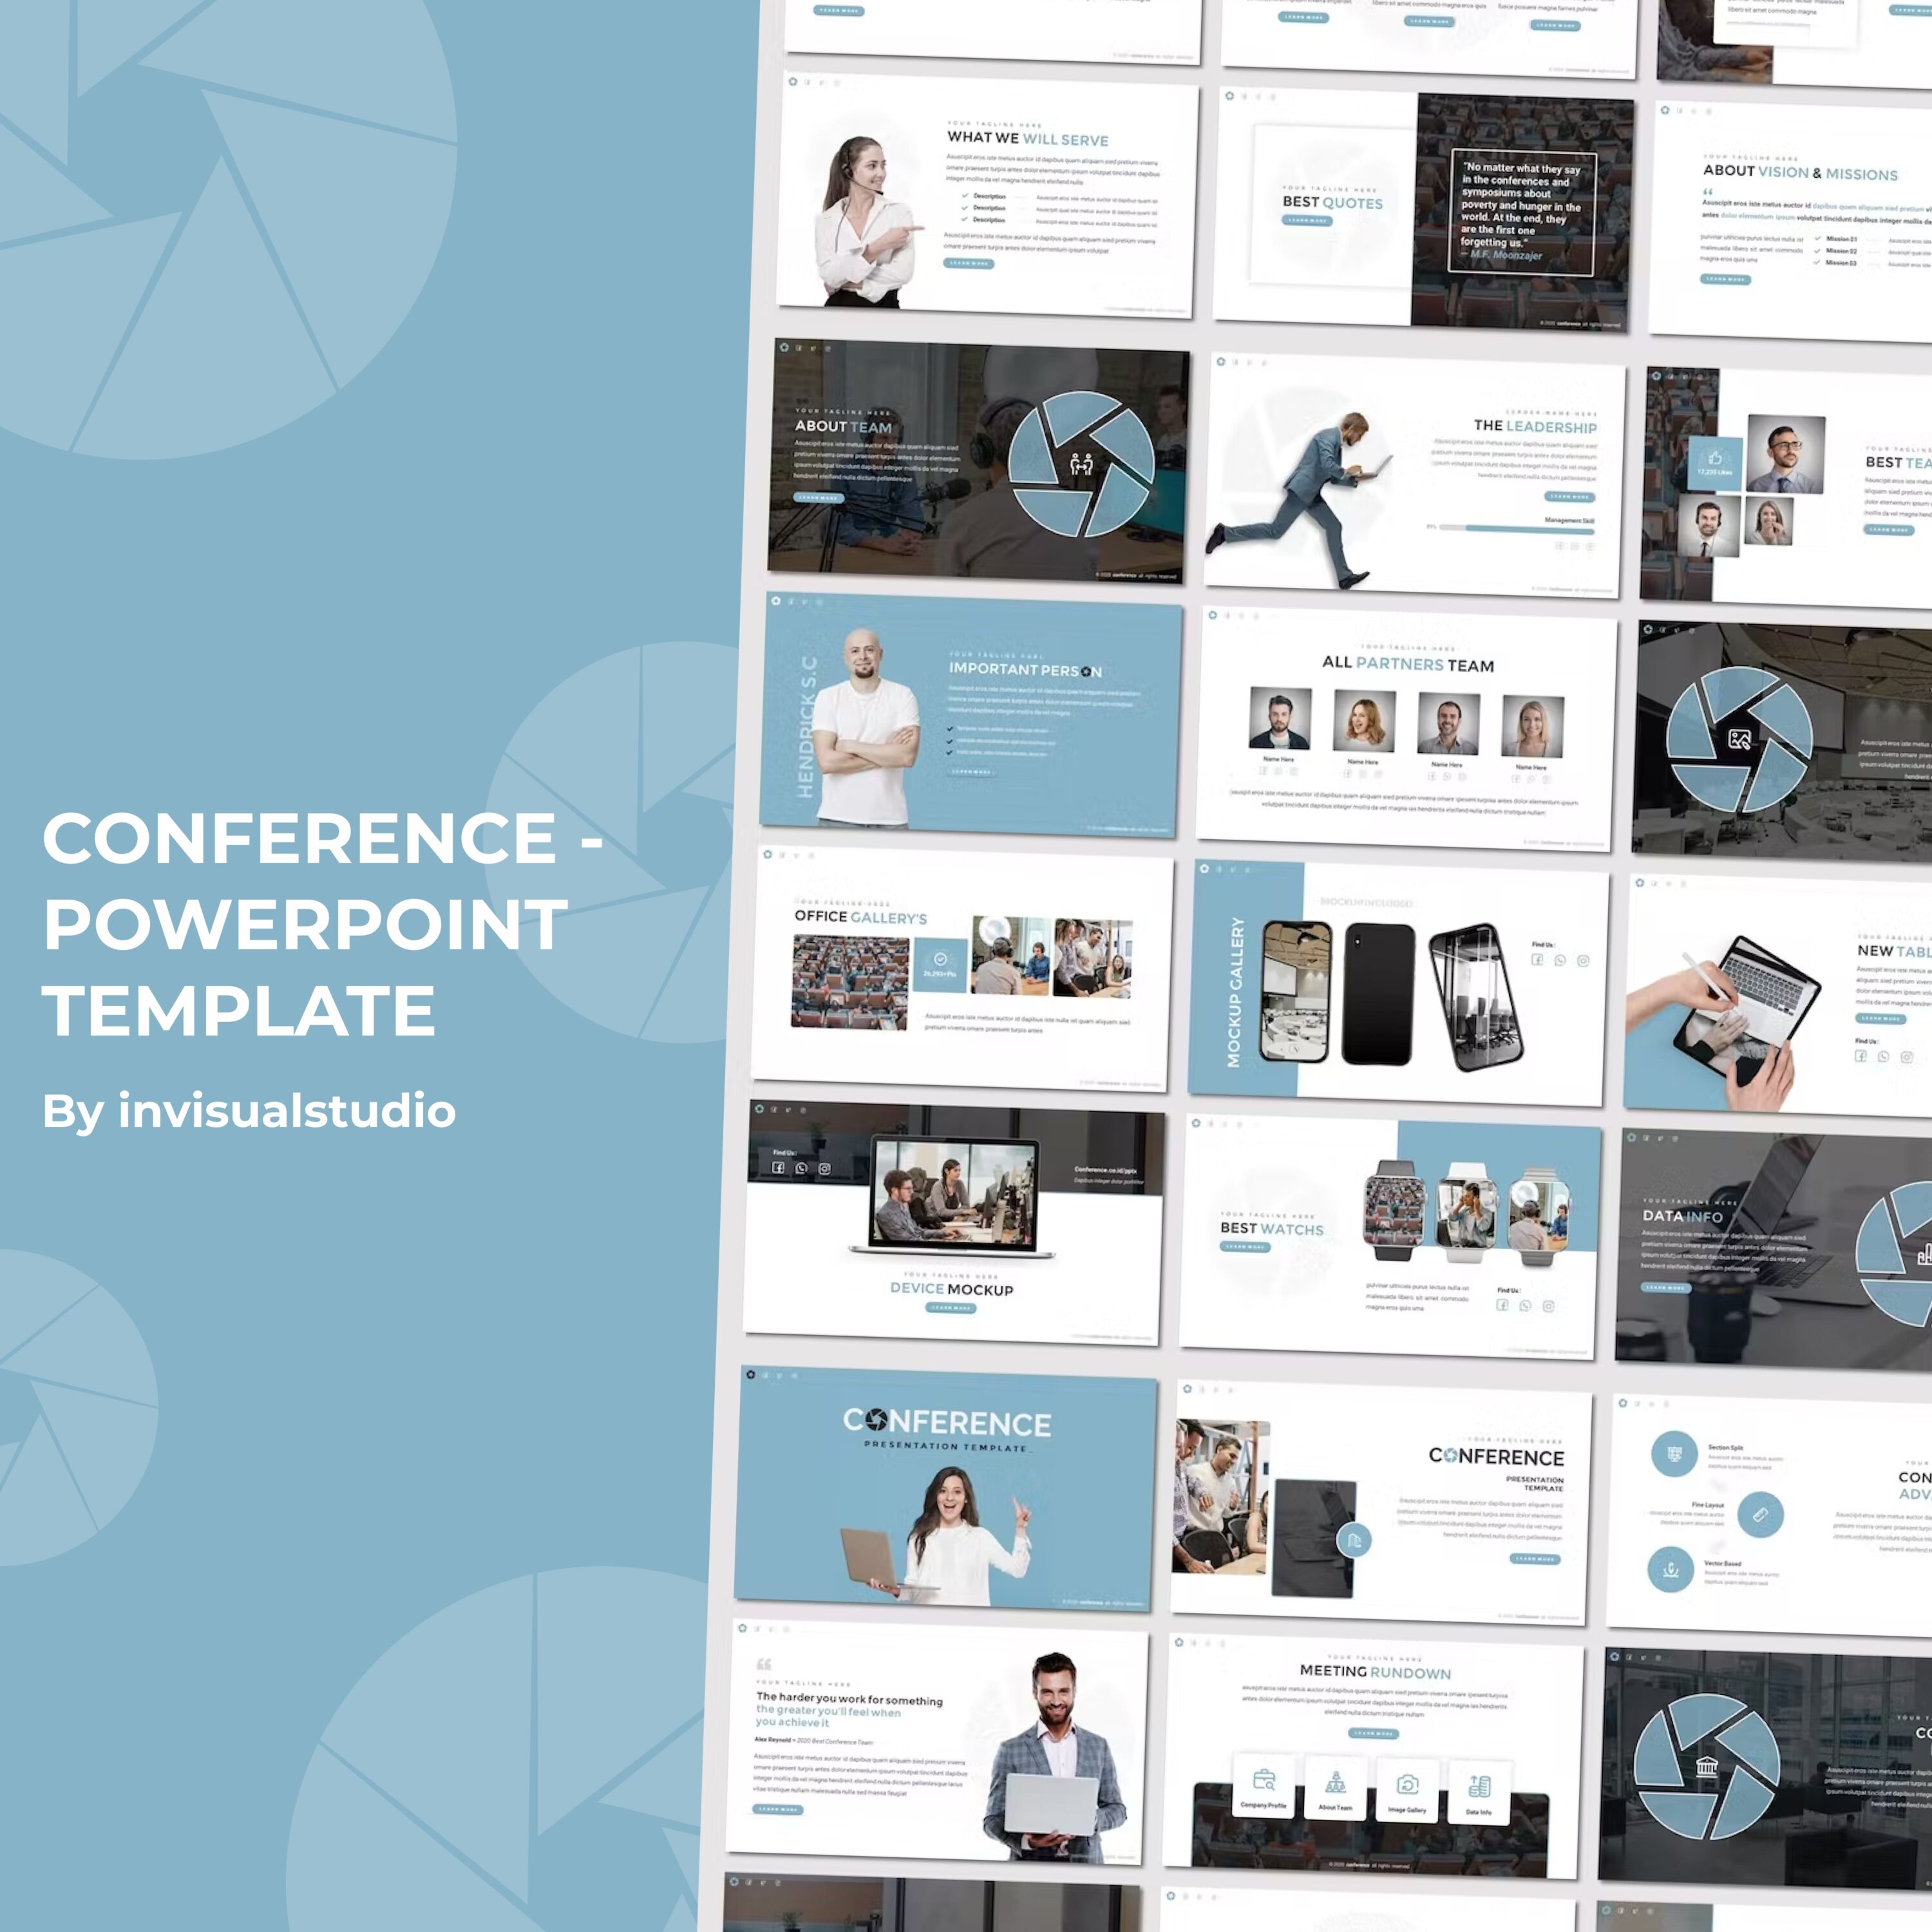 Preview illustration conference powerpoint template.